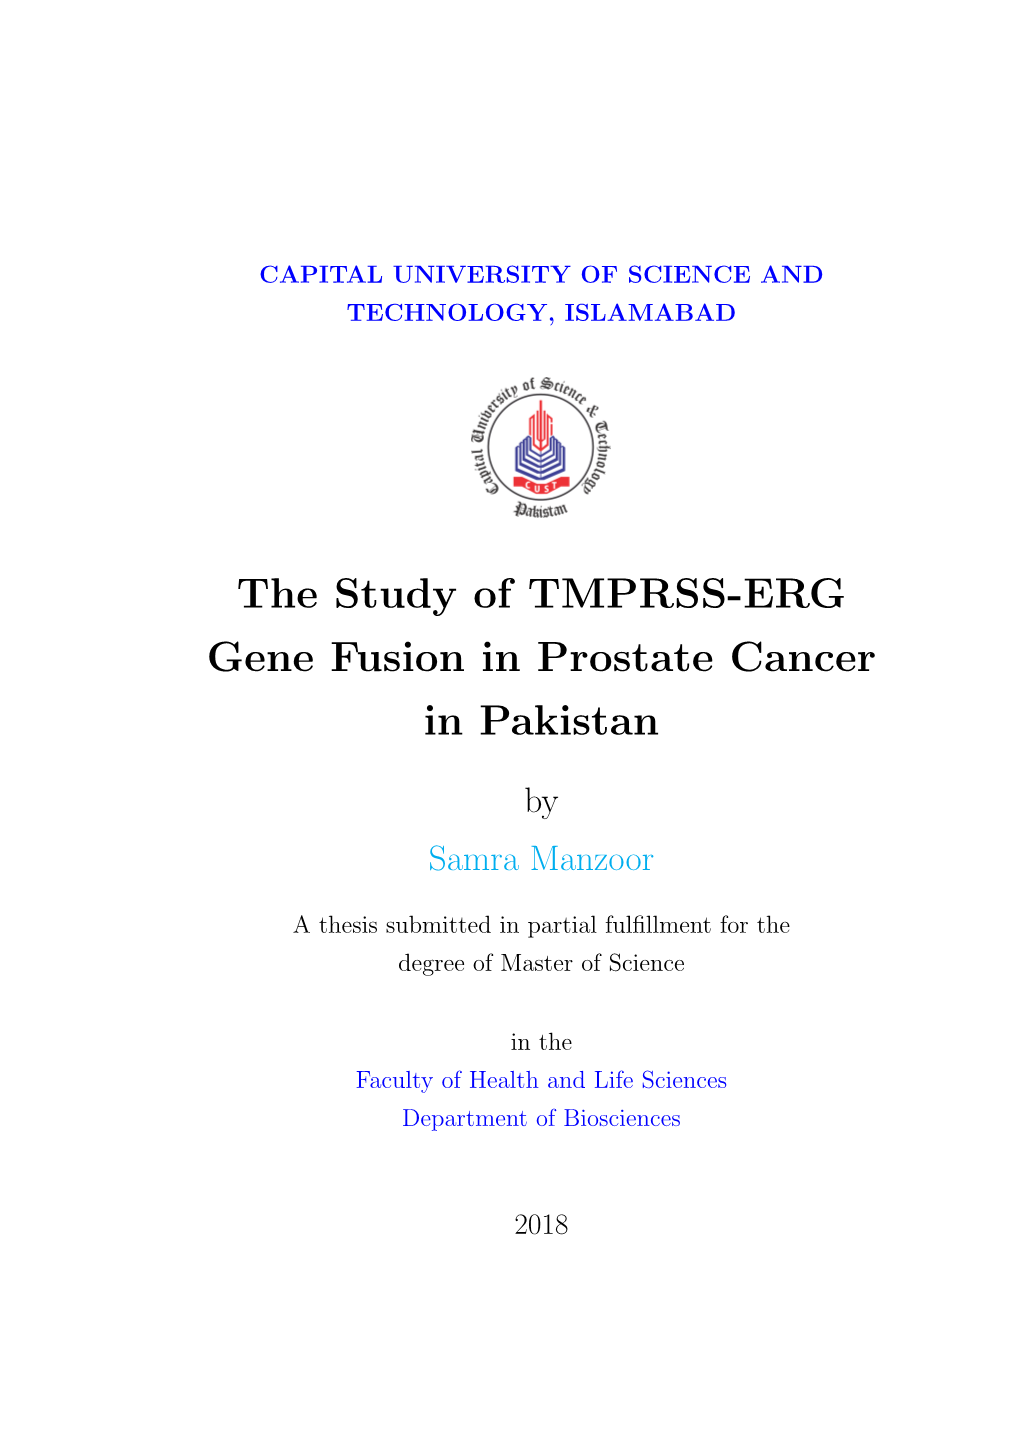 The Study of TMPRSS-ERG Gene Fusion in Prostate Cancer in Pakistan